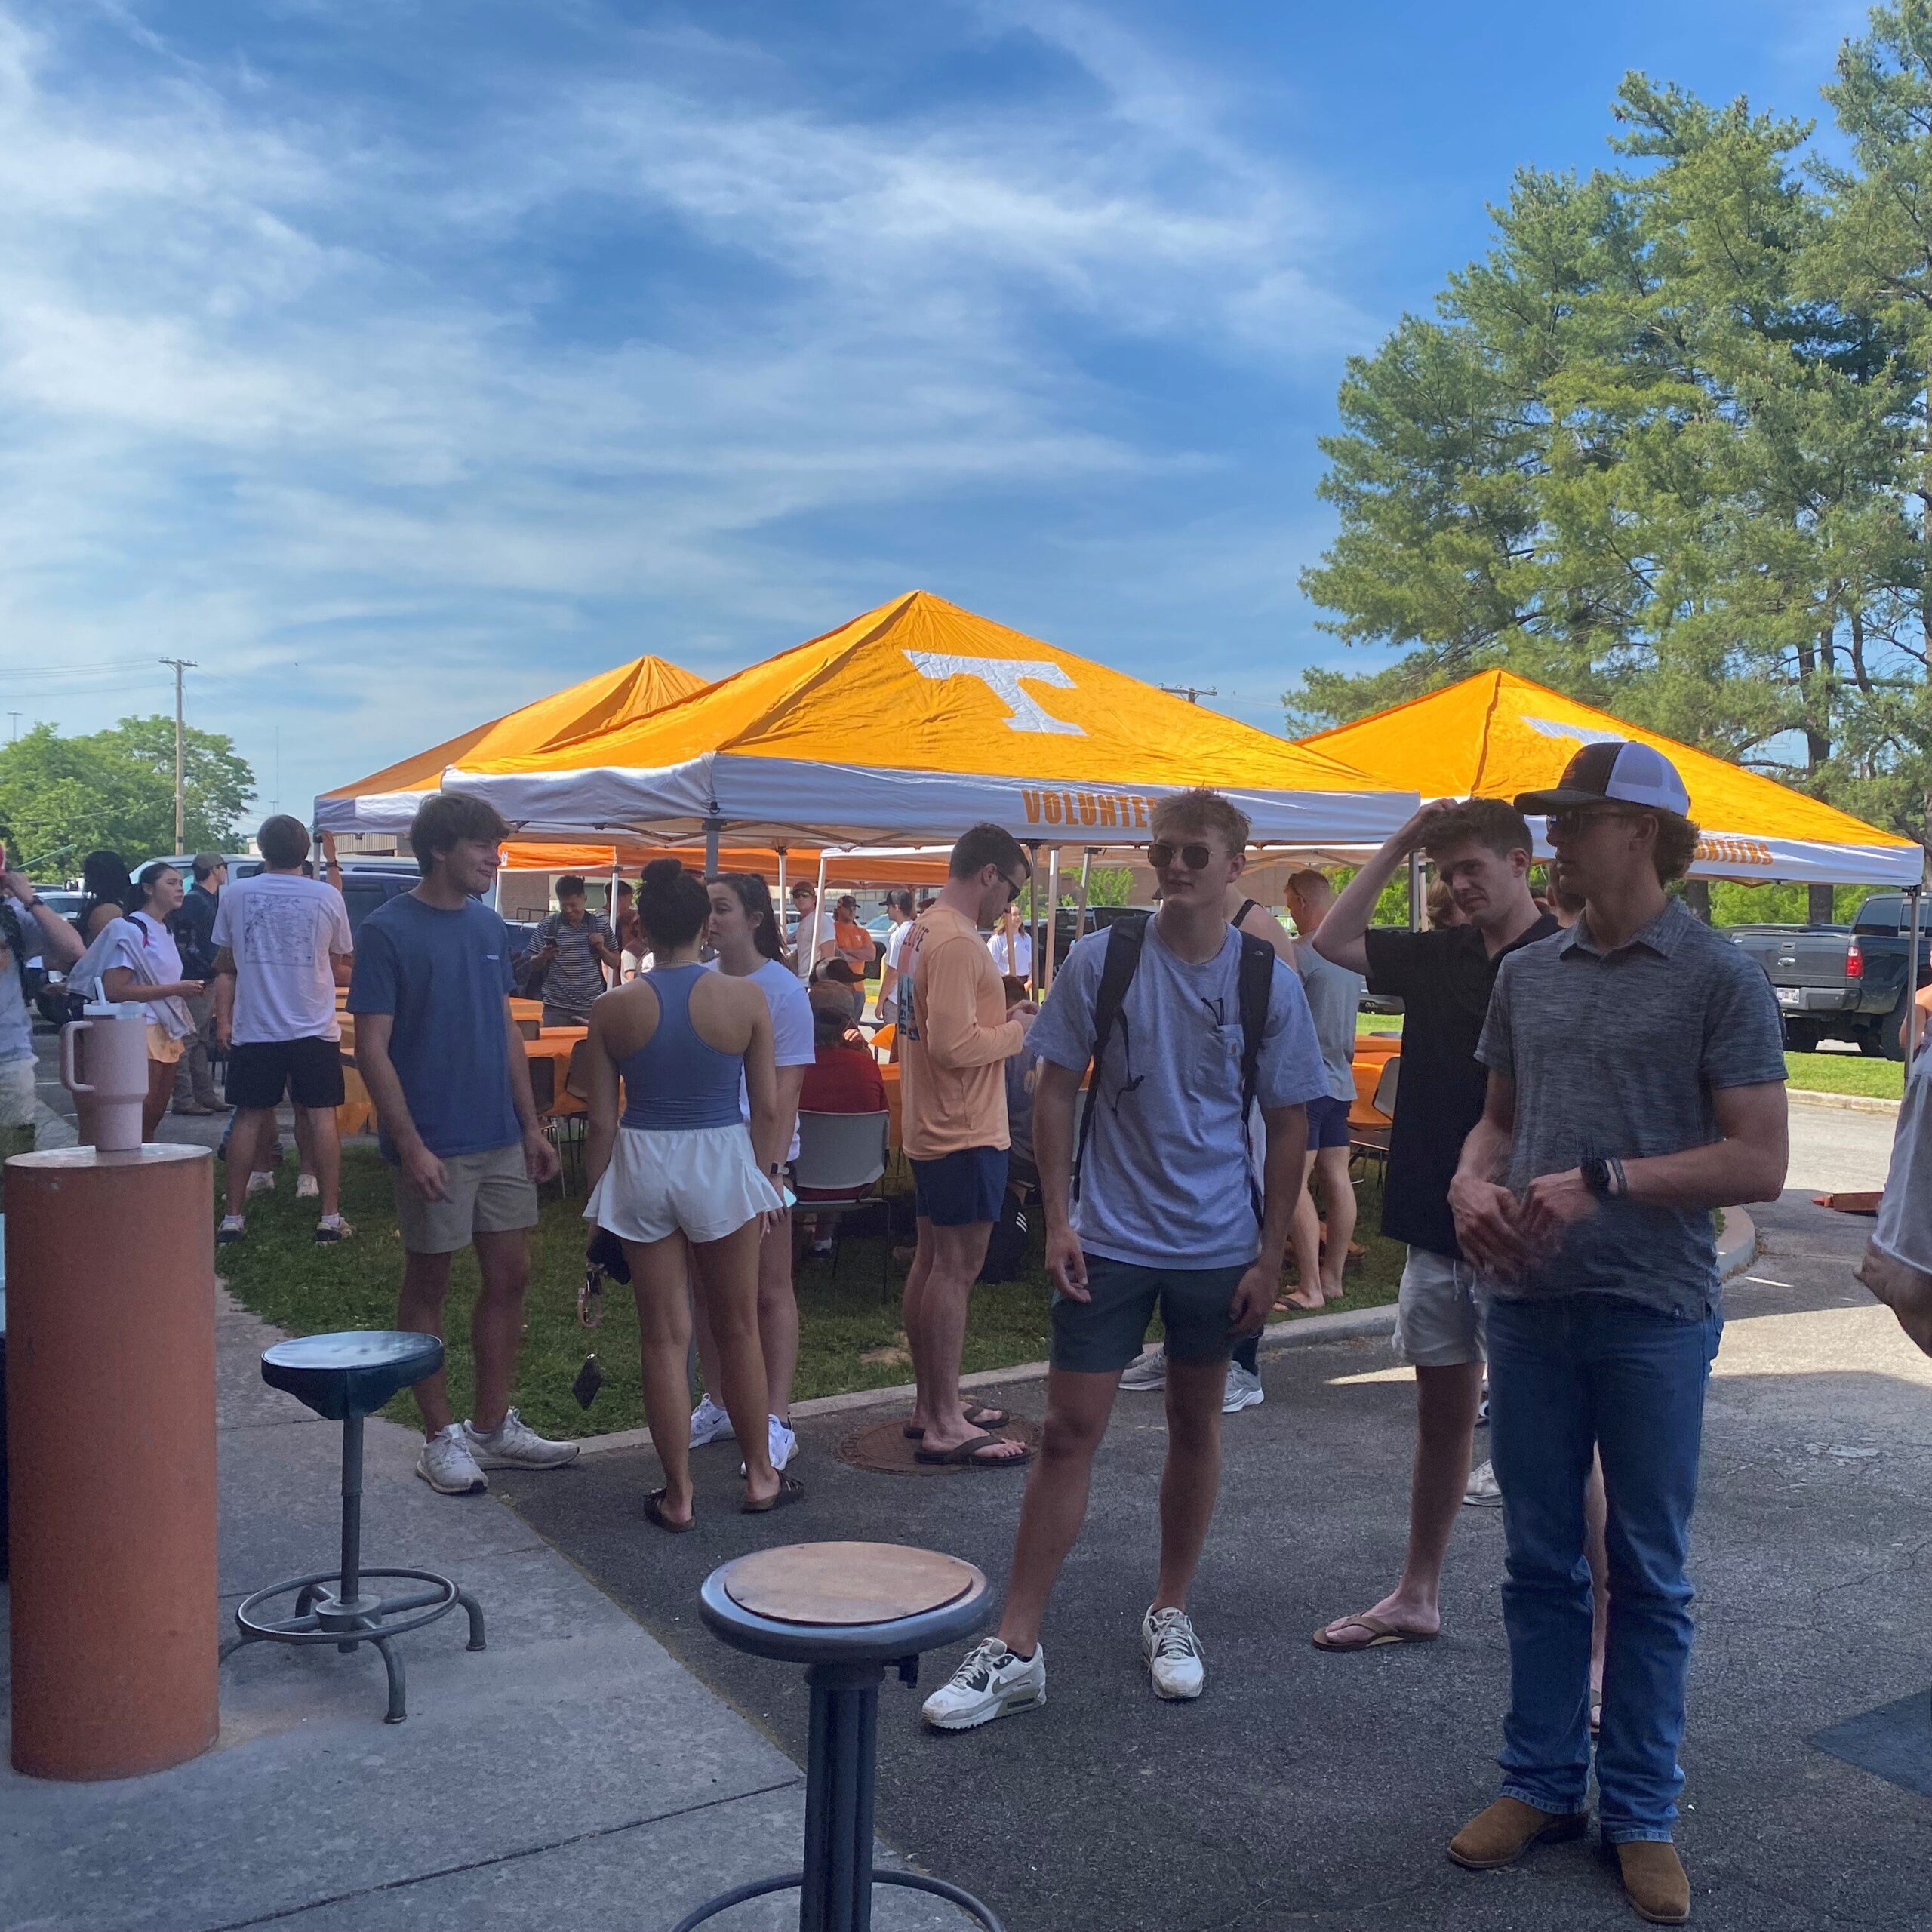 Group of students mingle at an outdoor event with University of Tennessee tents. 